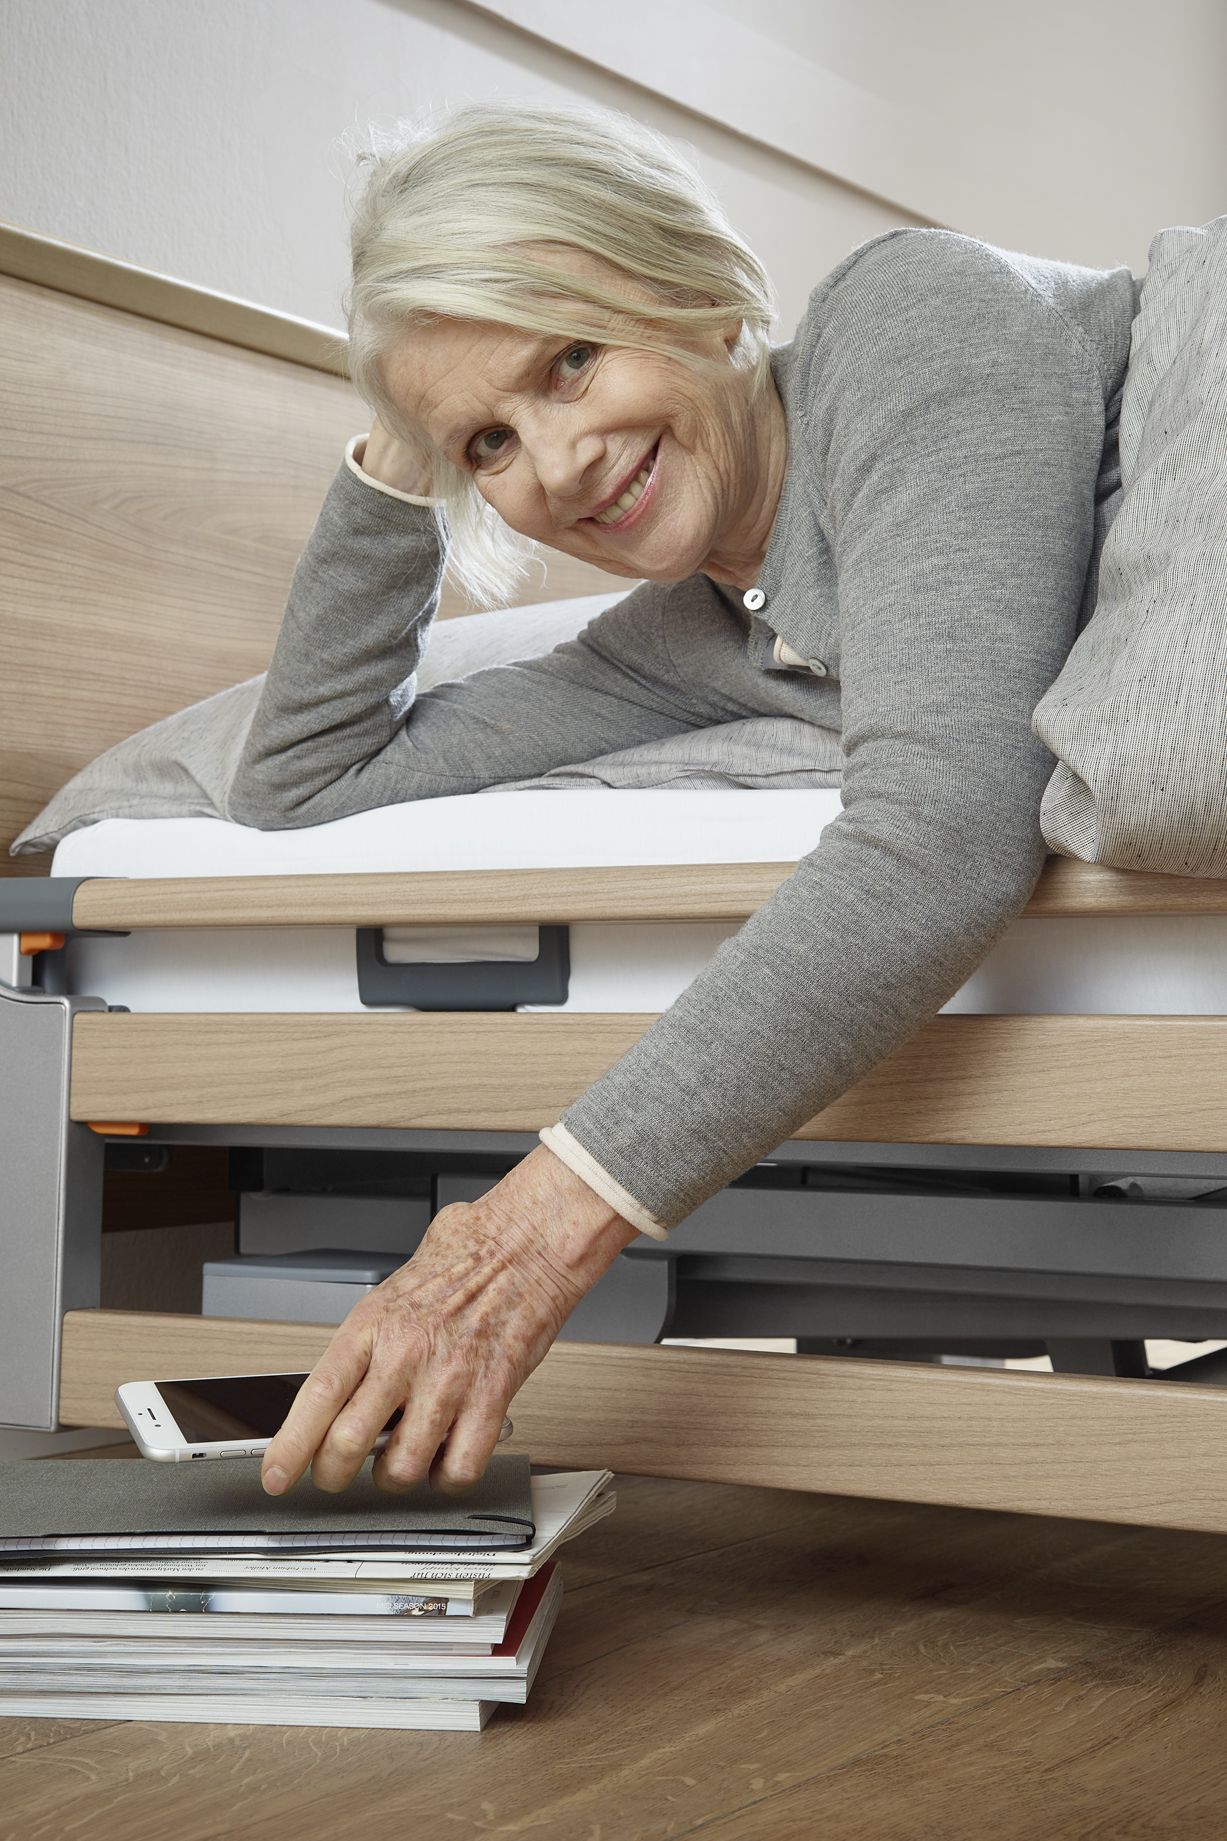 Regia low-height bed promotes fall prevention